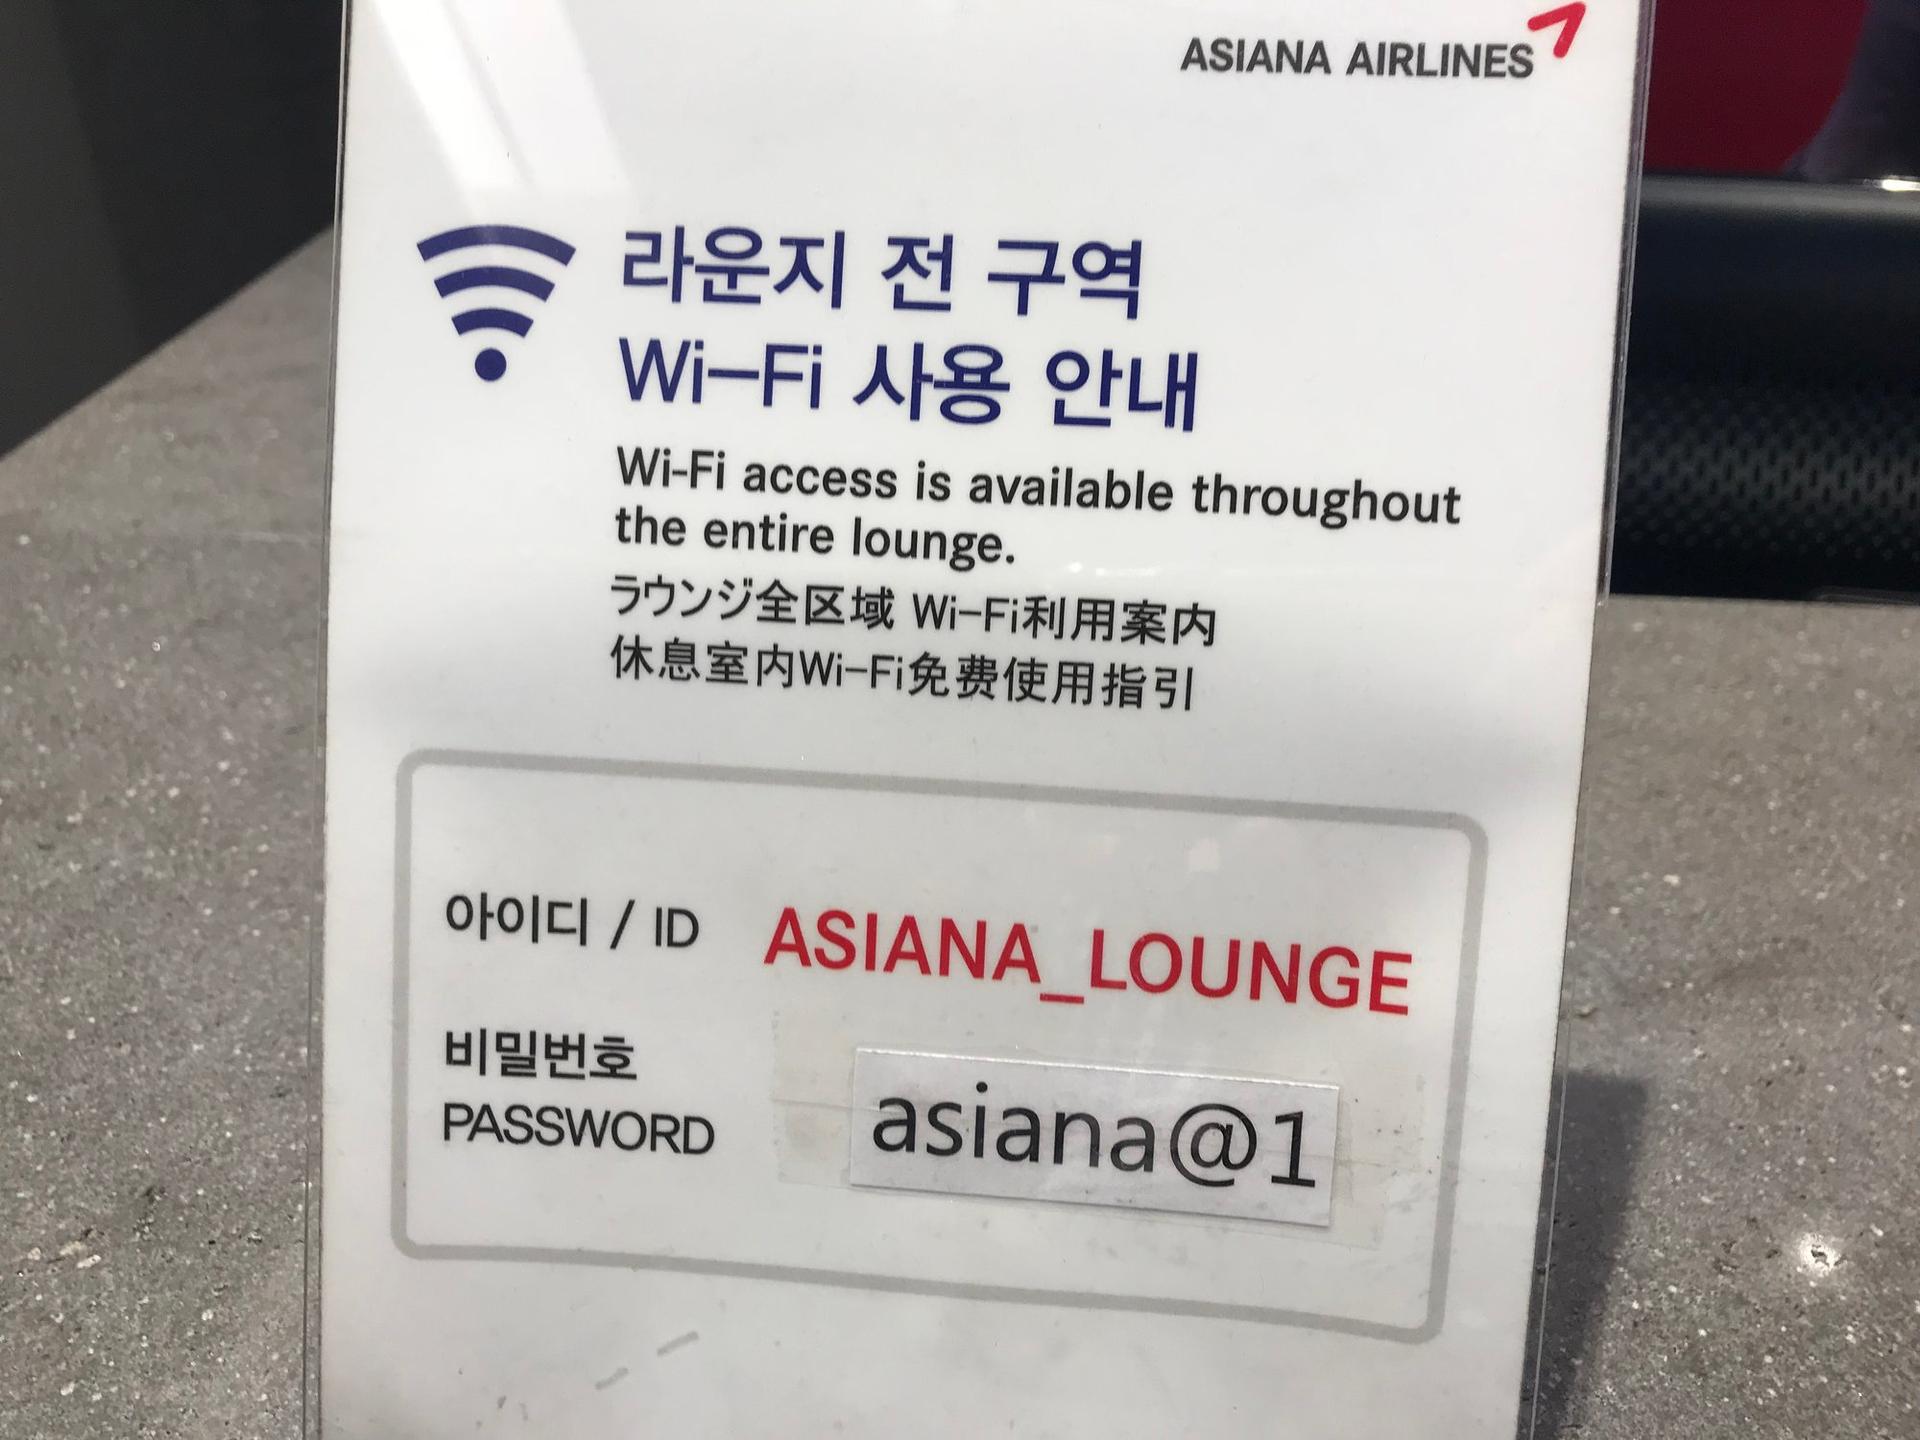 Asiana Airlines Lounge image 13 of 24